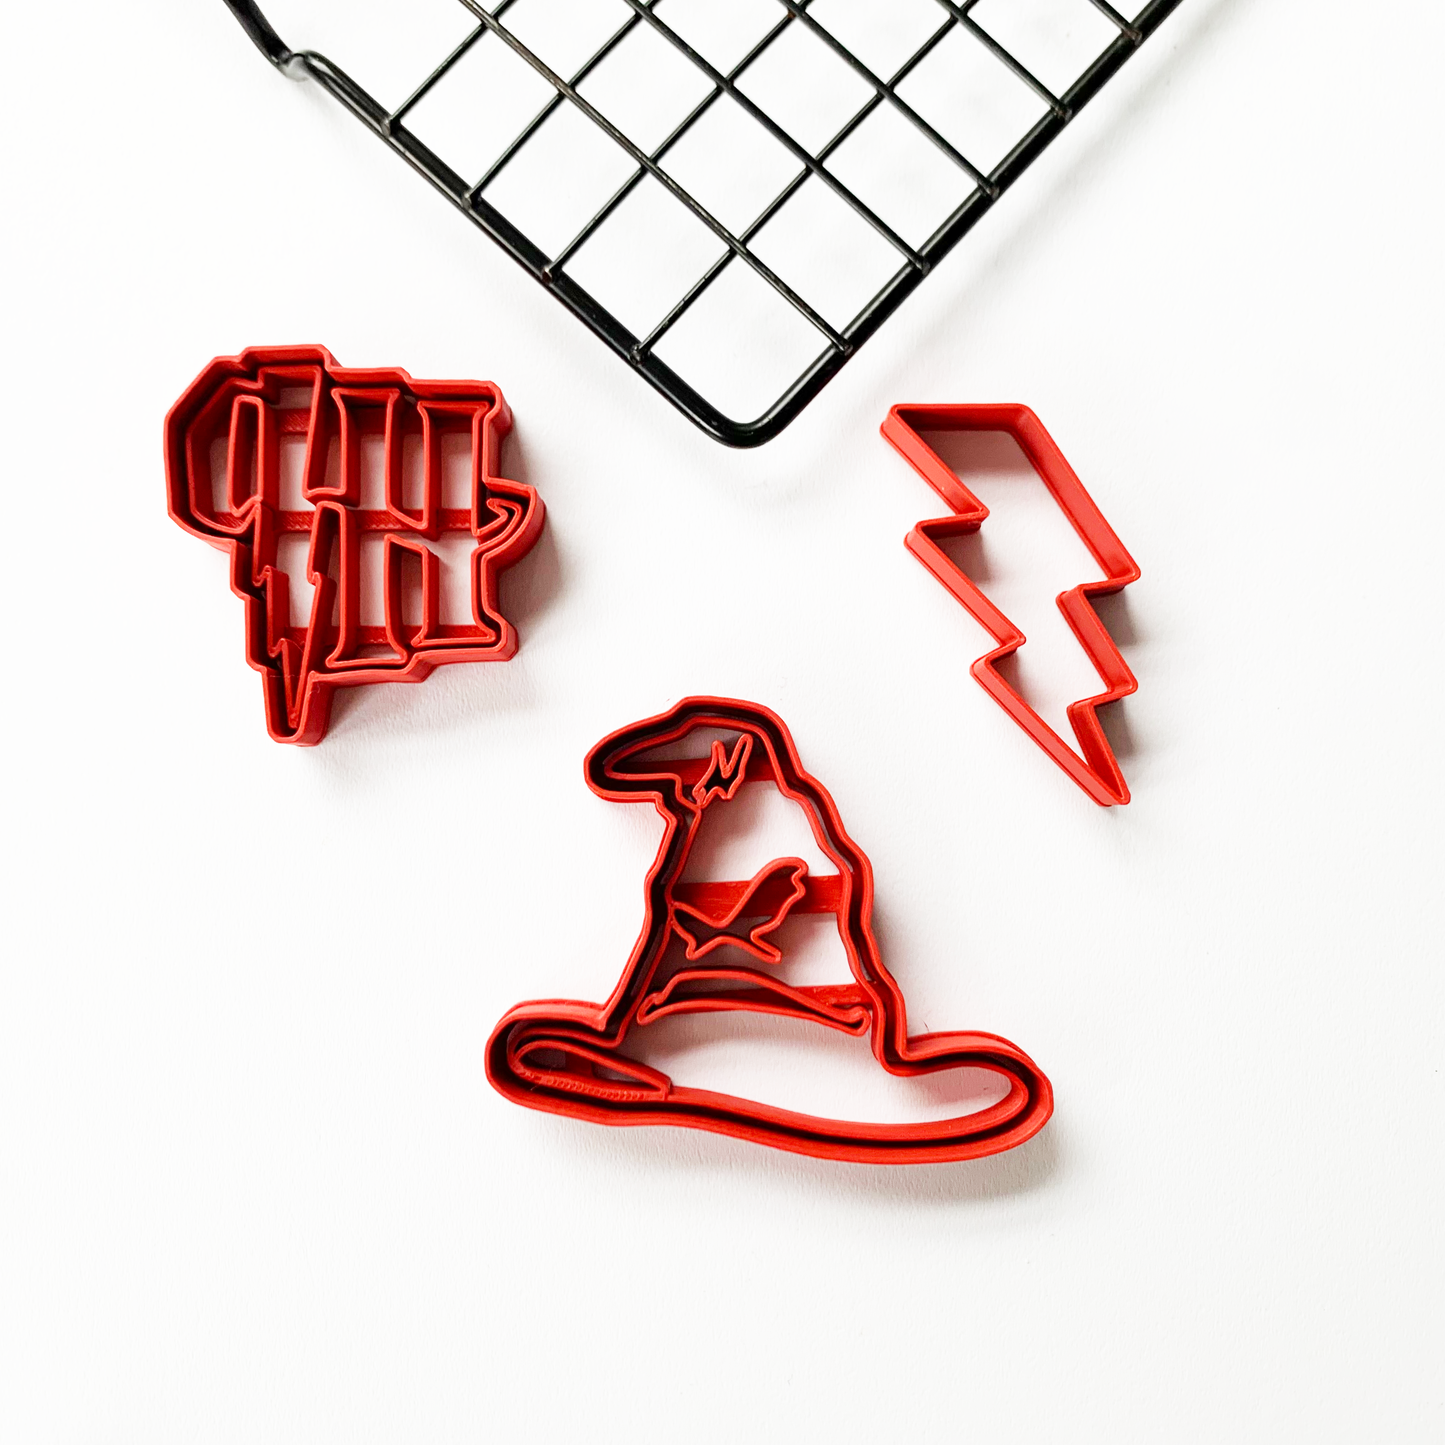 Harry Potter-Inspired cookie cutter fondant cupcake decoration 3 pieces - set number 003 MEG cookie cutters